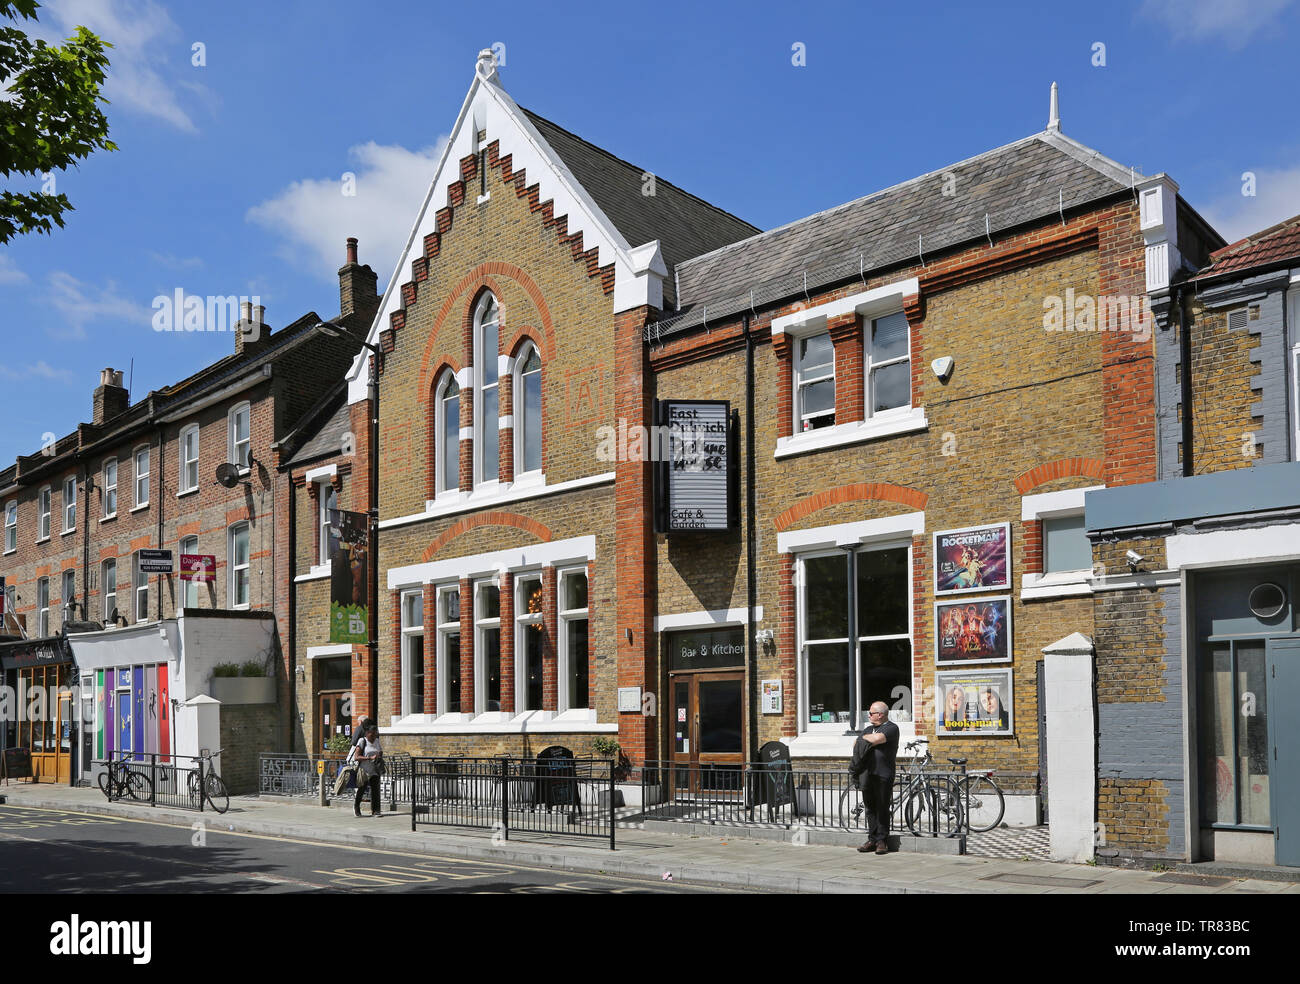 East Dulwich Picturehouse cinema. A new 3 screen cinema, bar and restaurant housed in a converted Victorian school building on Lordship Lane. Stock Photo